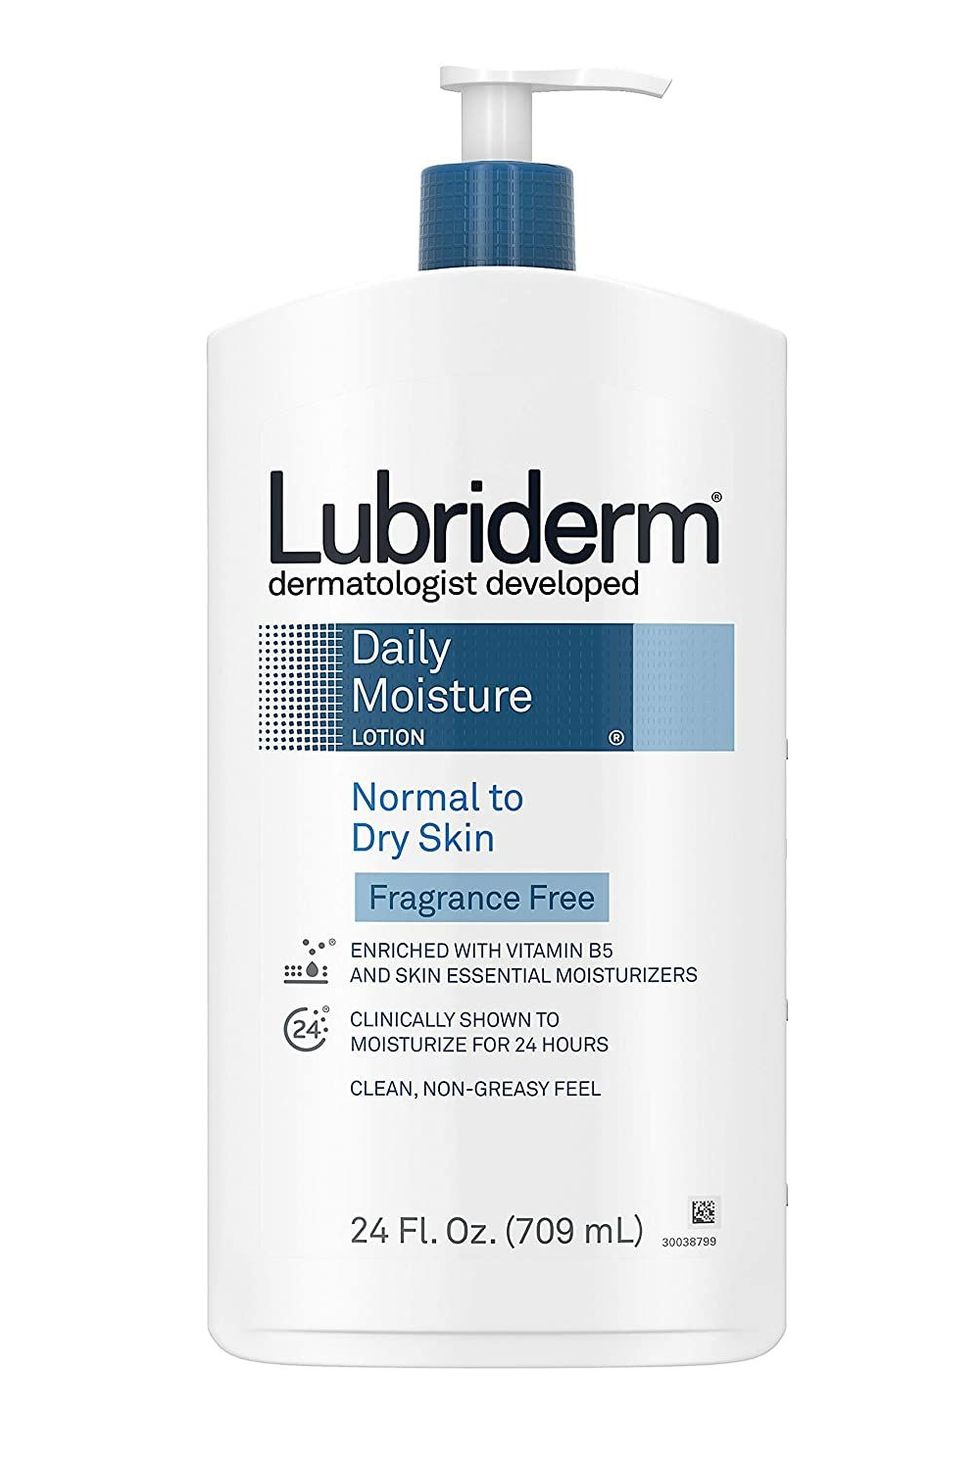 Lubriderm Daily Moisture Fragrance-Free Lotion